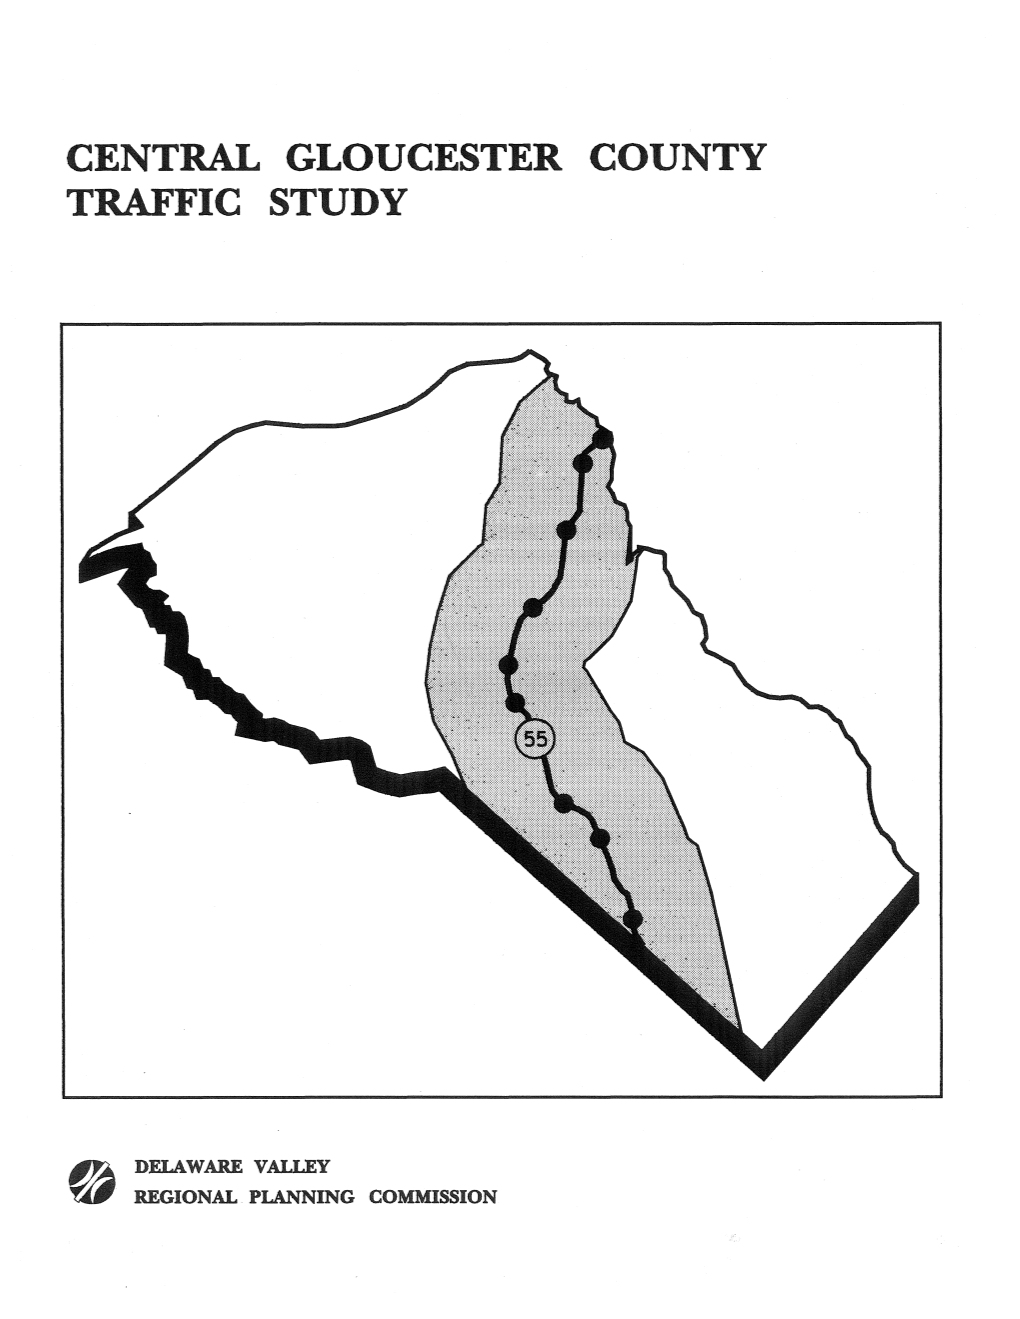 Central Gloucester County Traffic Study